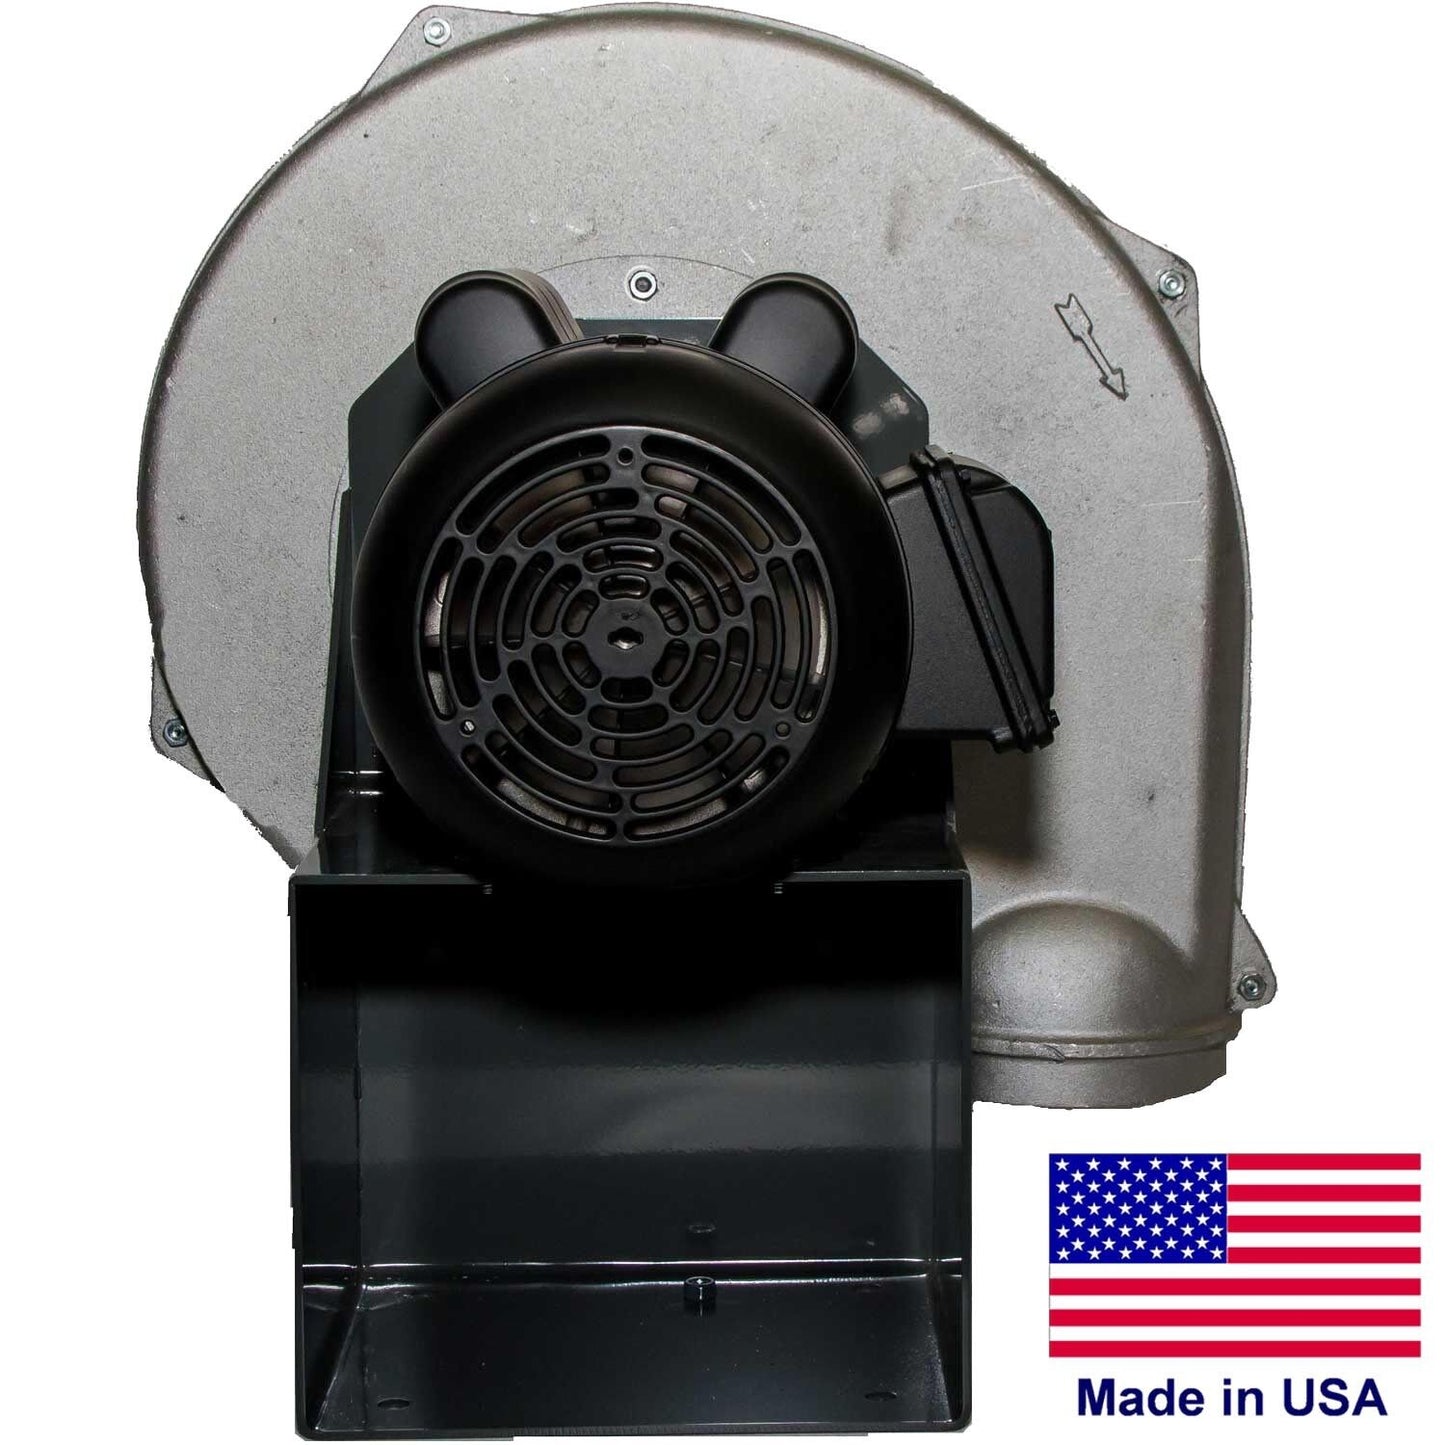 ALUMINUM CENTRIFUGAL BLOWER - 1600 CFM - 115/230 V - 1PH - 5 Hp - 7" In / 6" Out